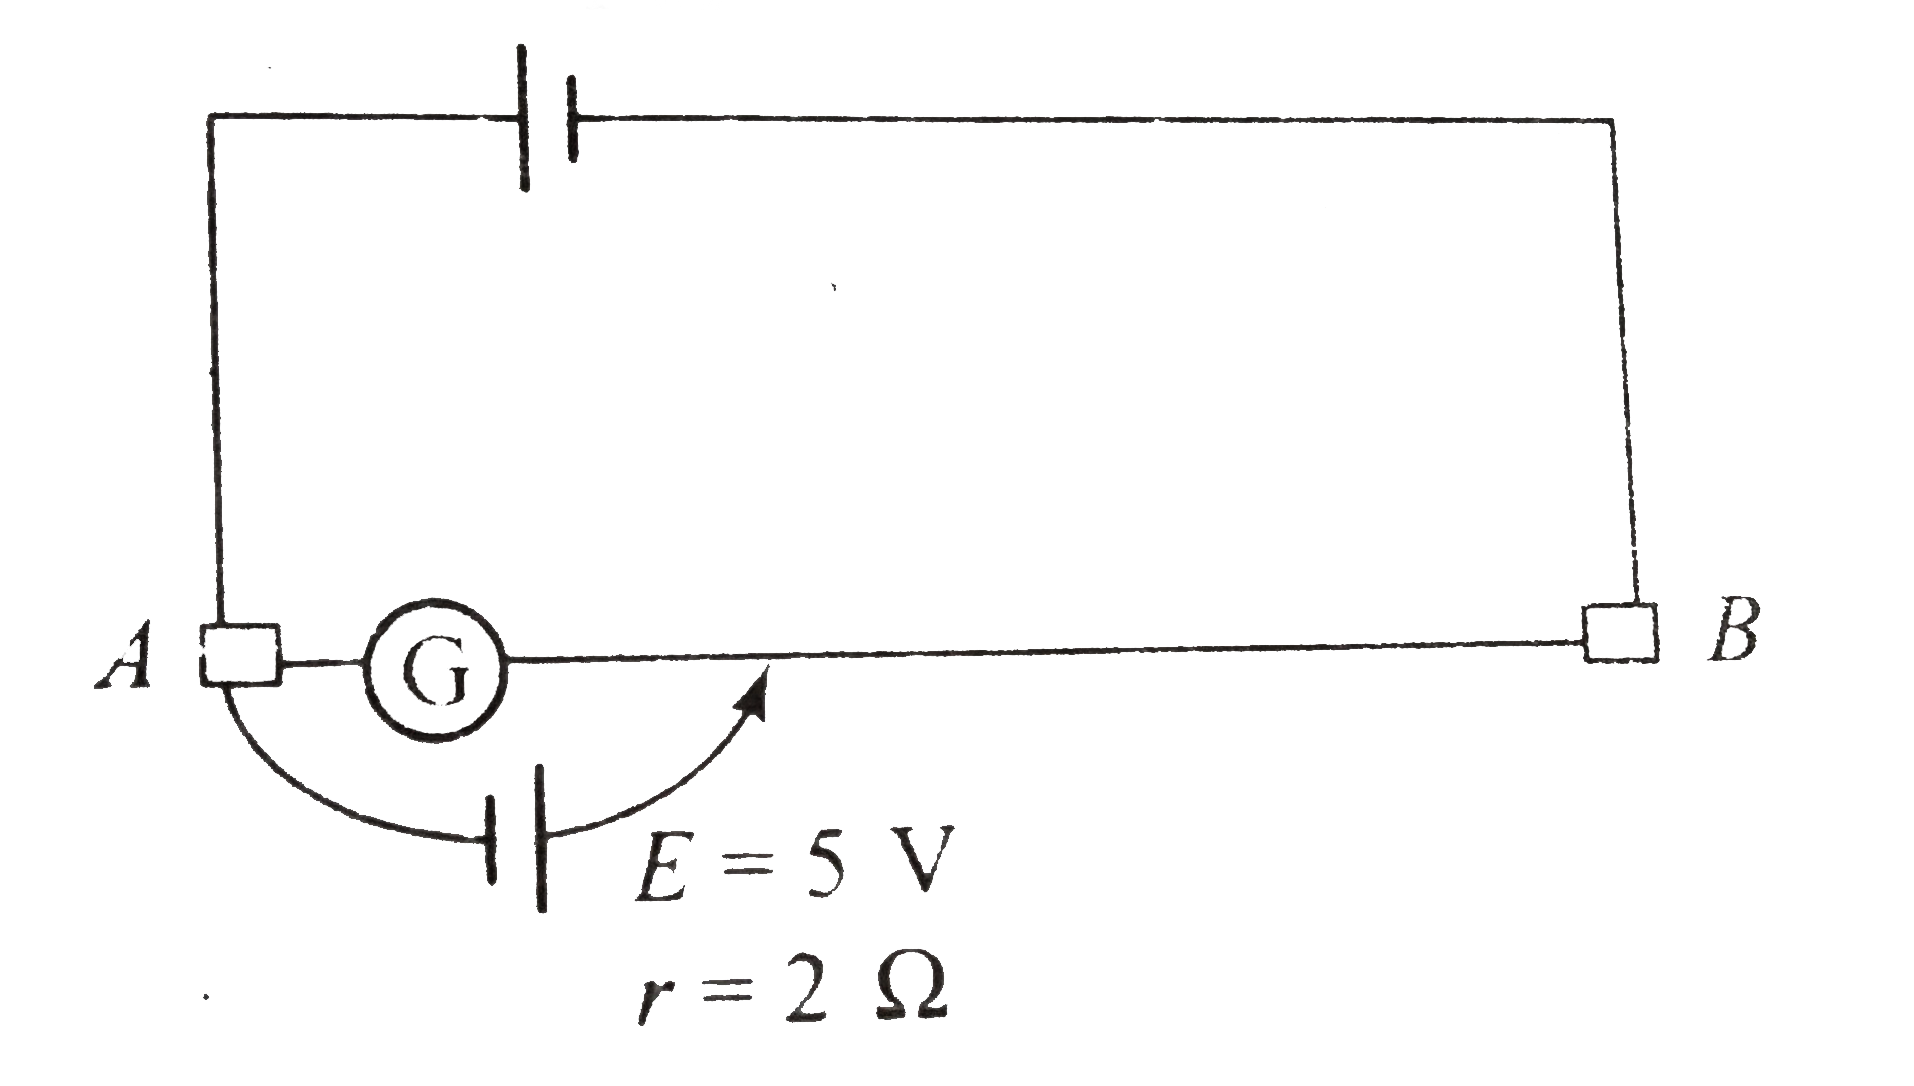 For the potentiometer arrangement shown in the figure, length of wire AB is 100 cm and its resistance is 9 Omega. Find the length AC for which the galvanometer G will show zero deflection.